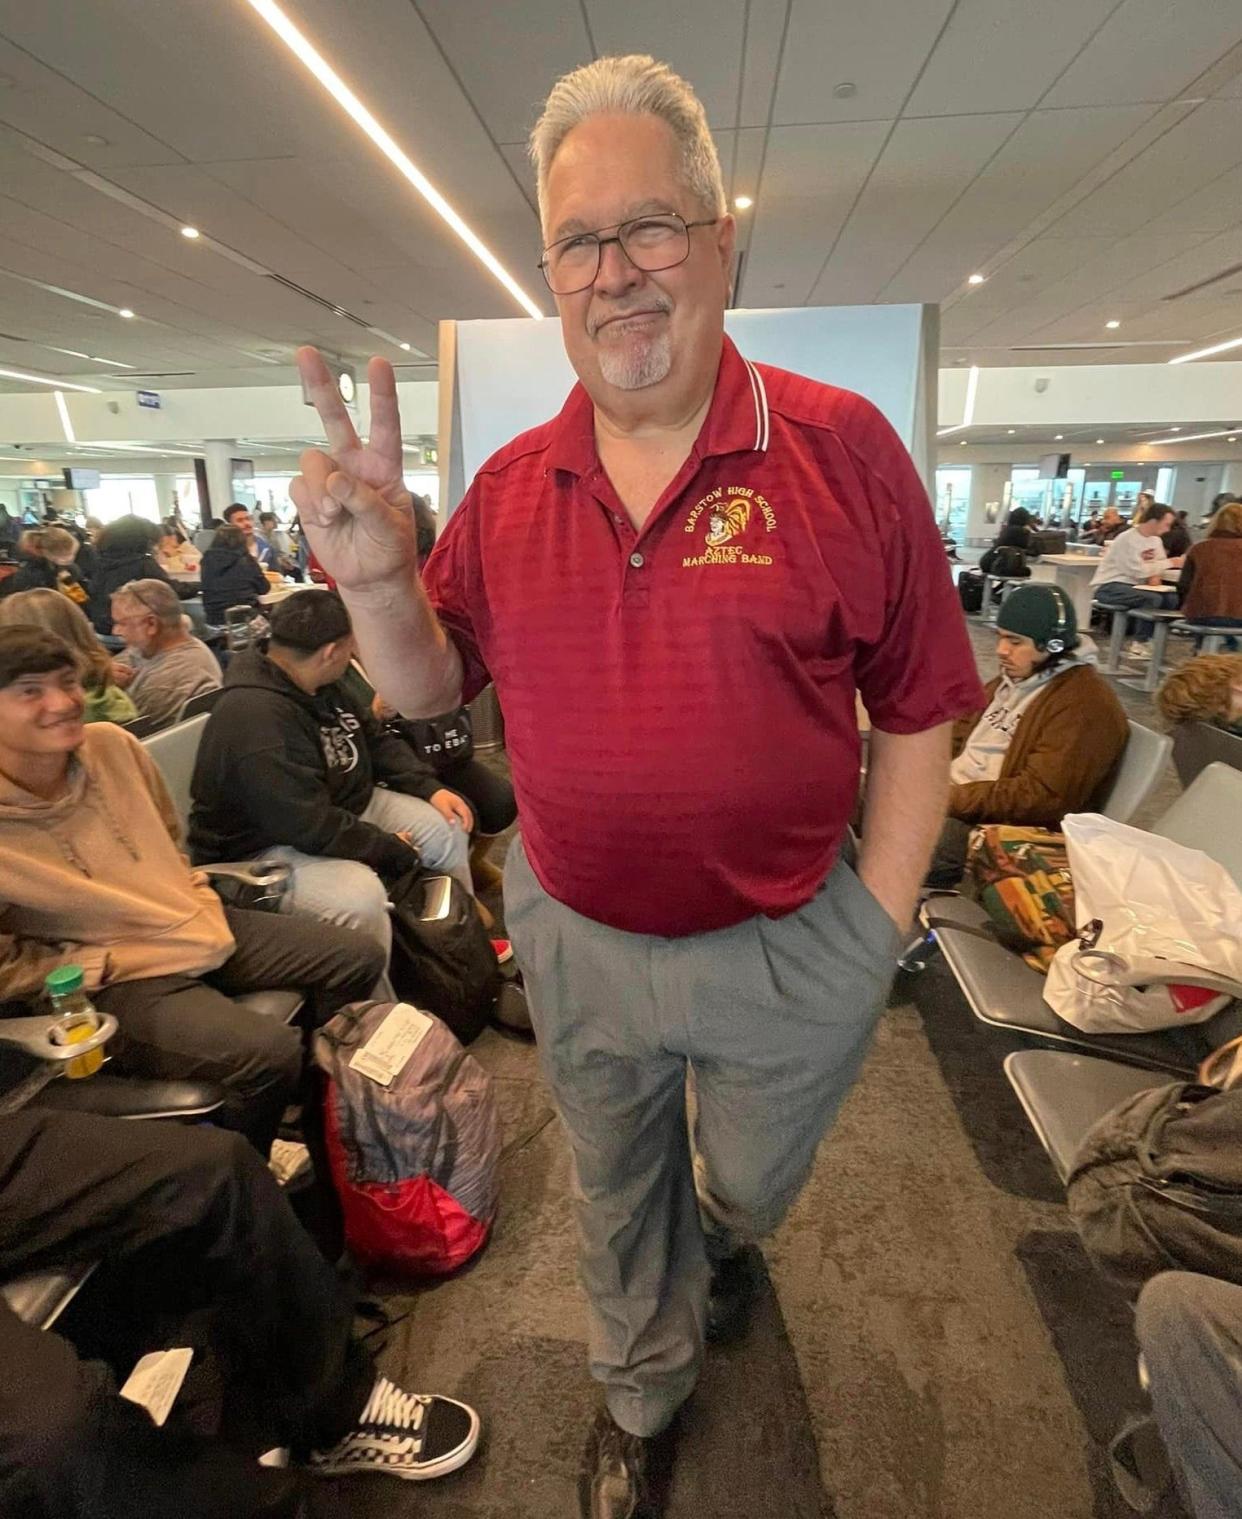 Barstow High School Band Director Dan Barilone waits with the band at Los Angeles International Airport on Monday. The band’s flight from LAX to Texas was eventually canceled, squashing the band’s scheduled performance at the Alamo Bowl on Thursday.